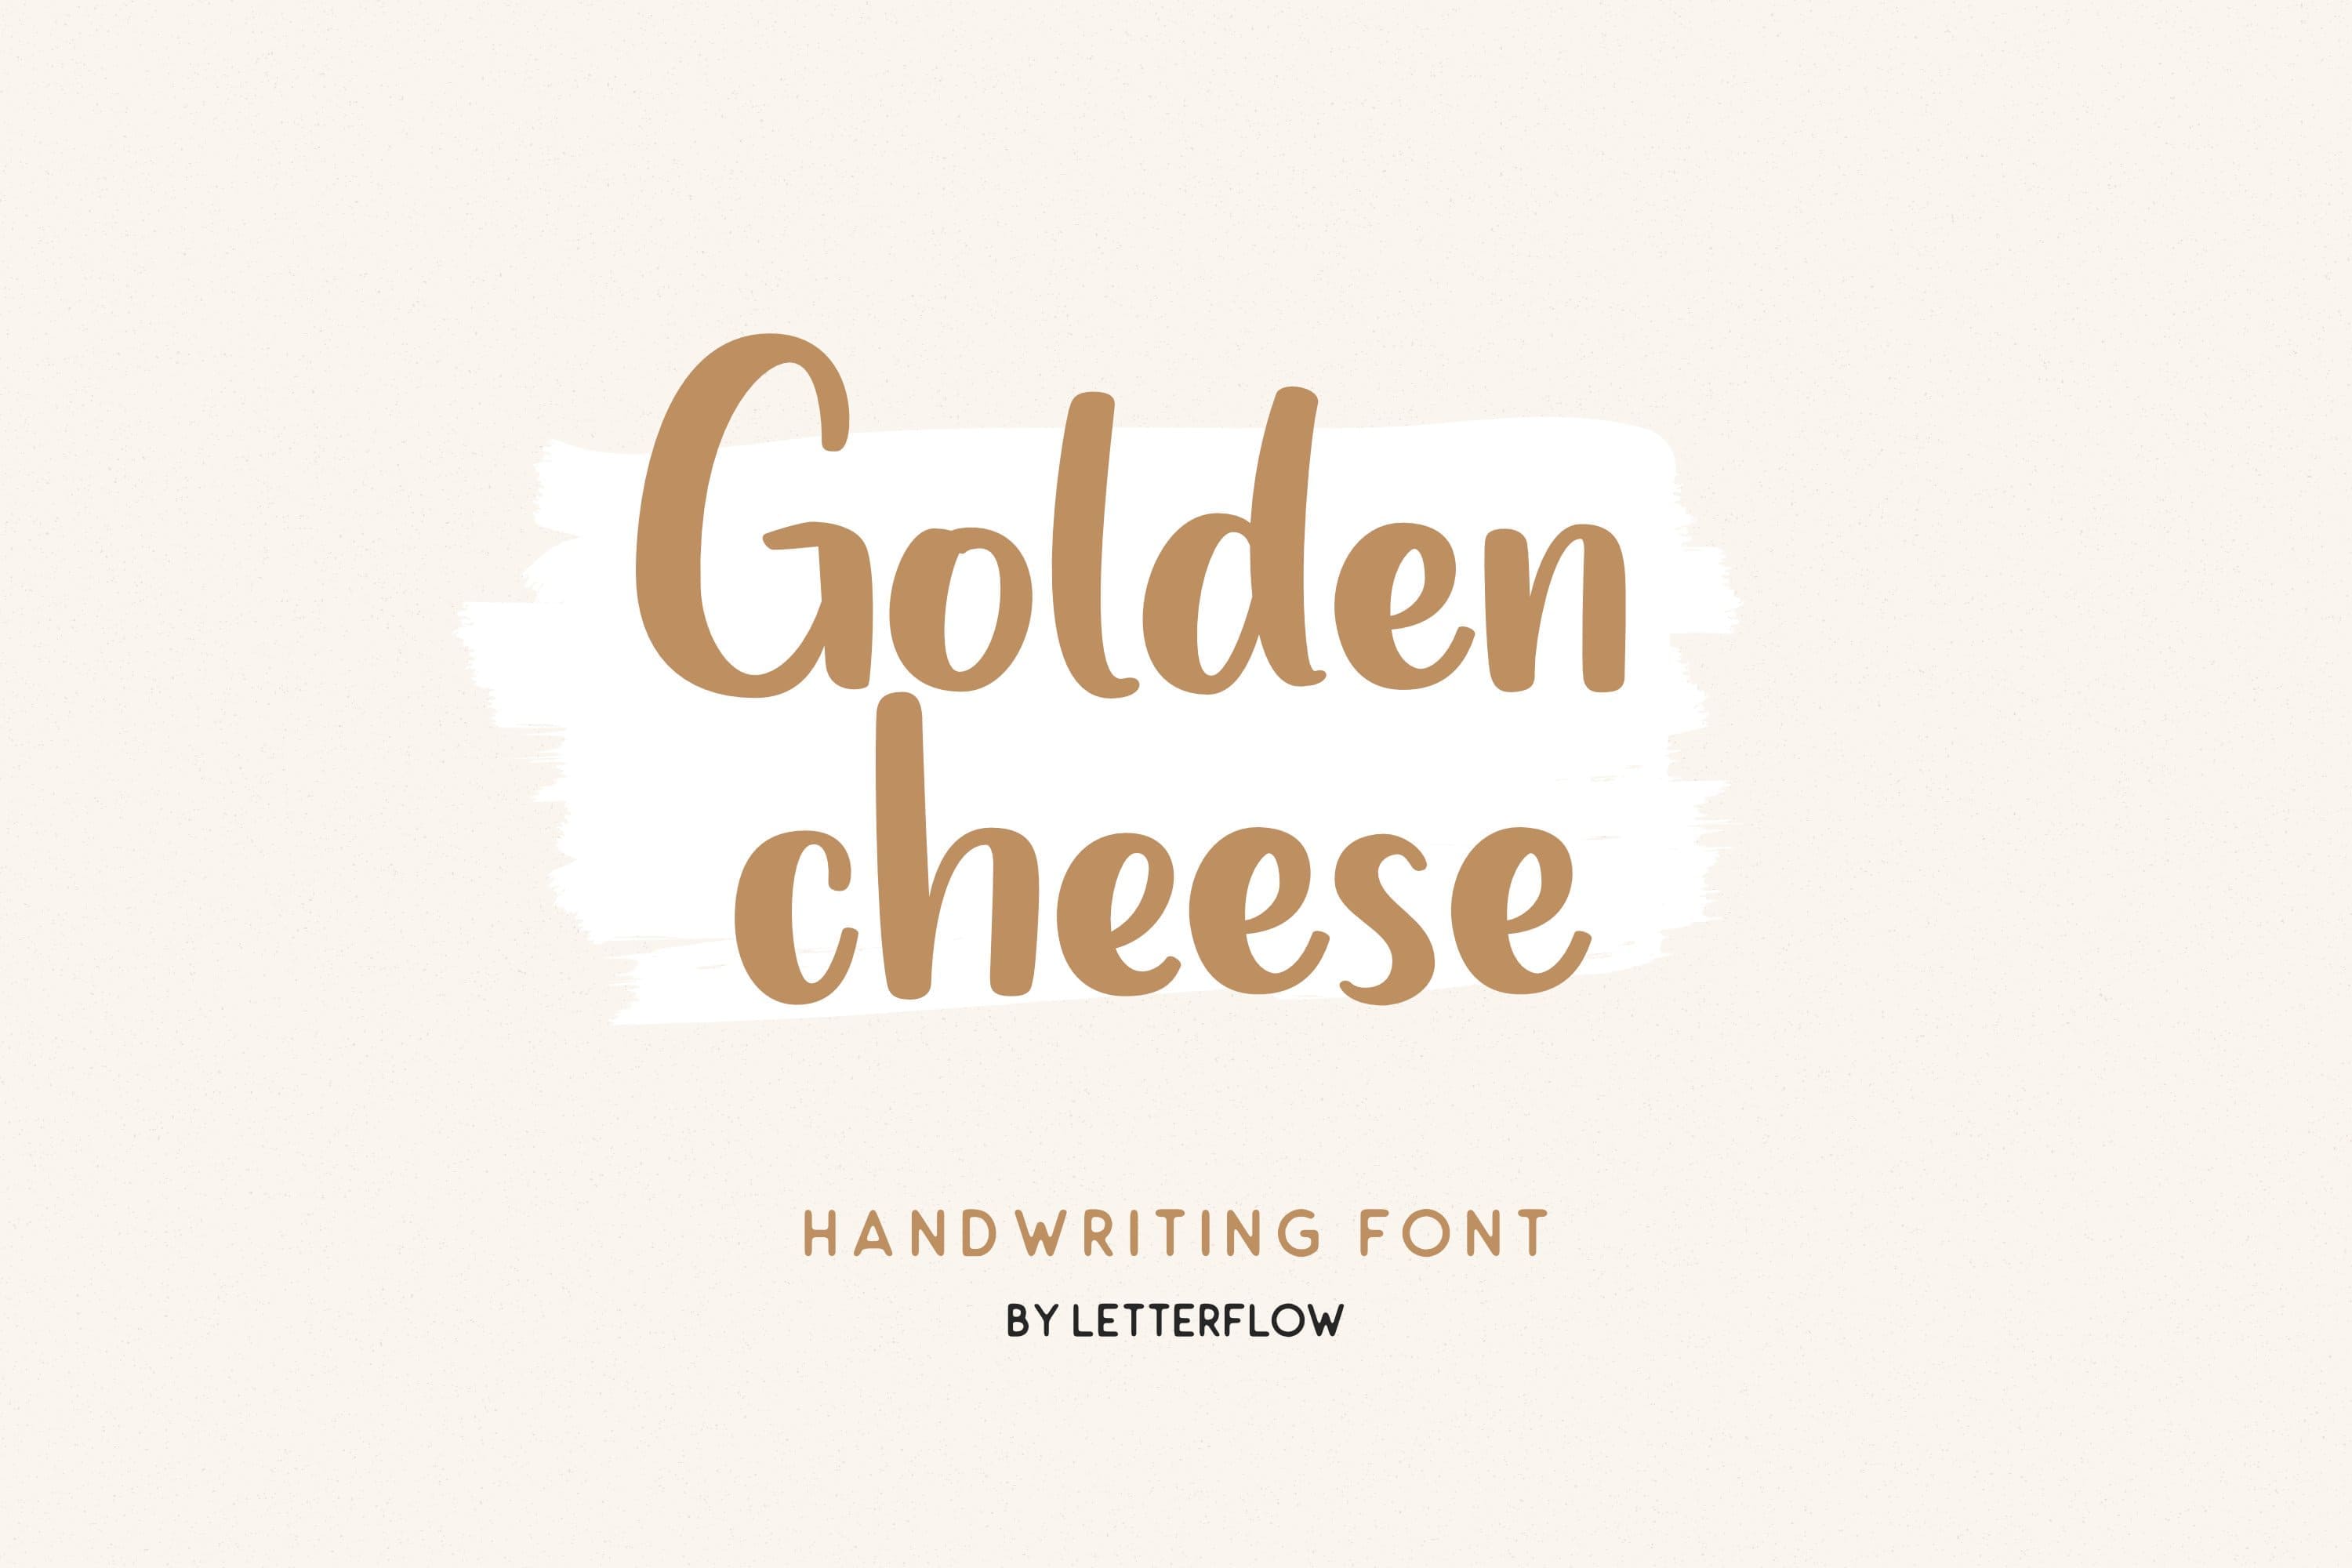 Golden cheese - handwriting font, main picture 3000x2000.